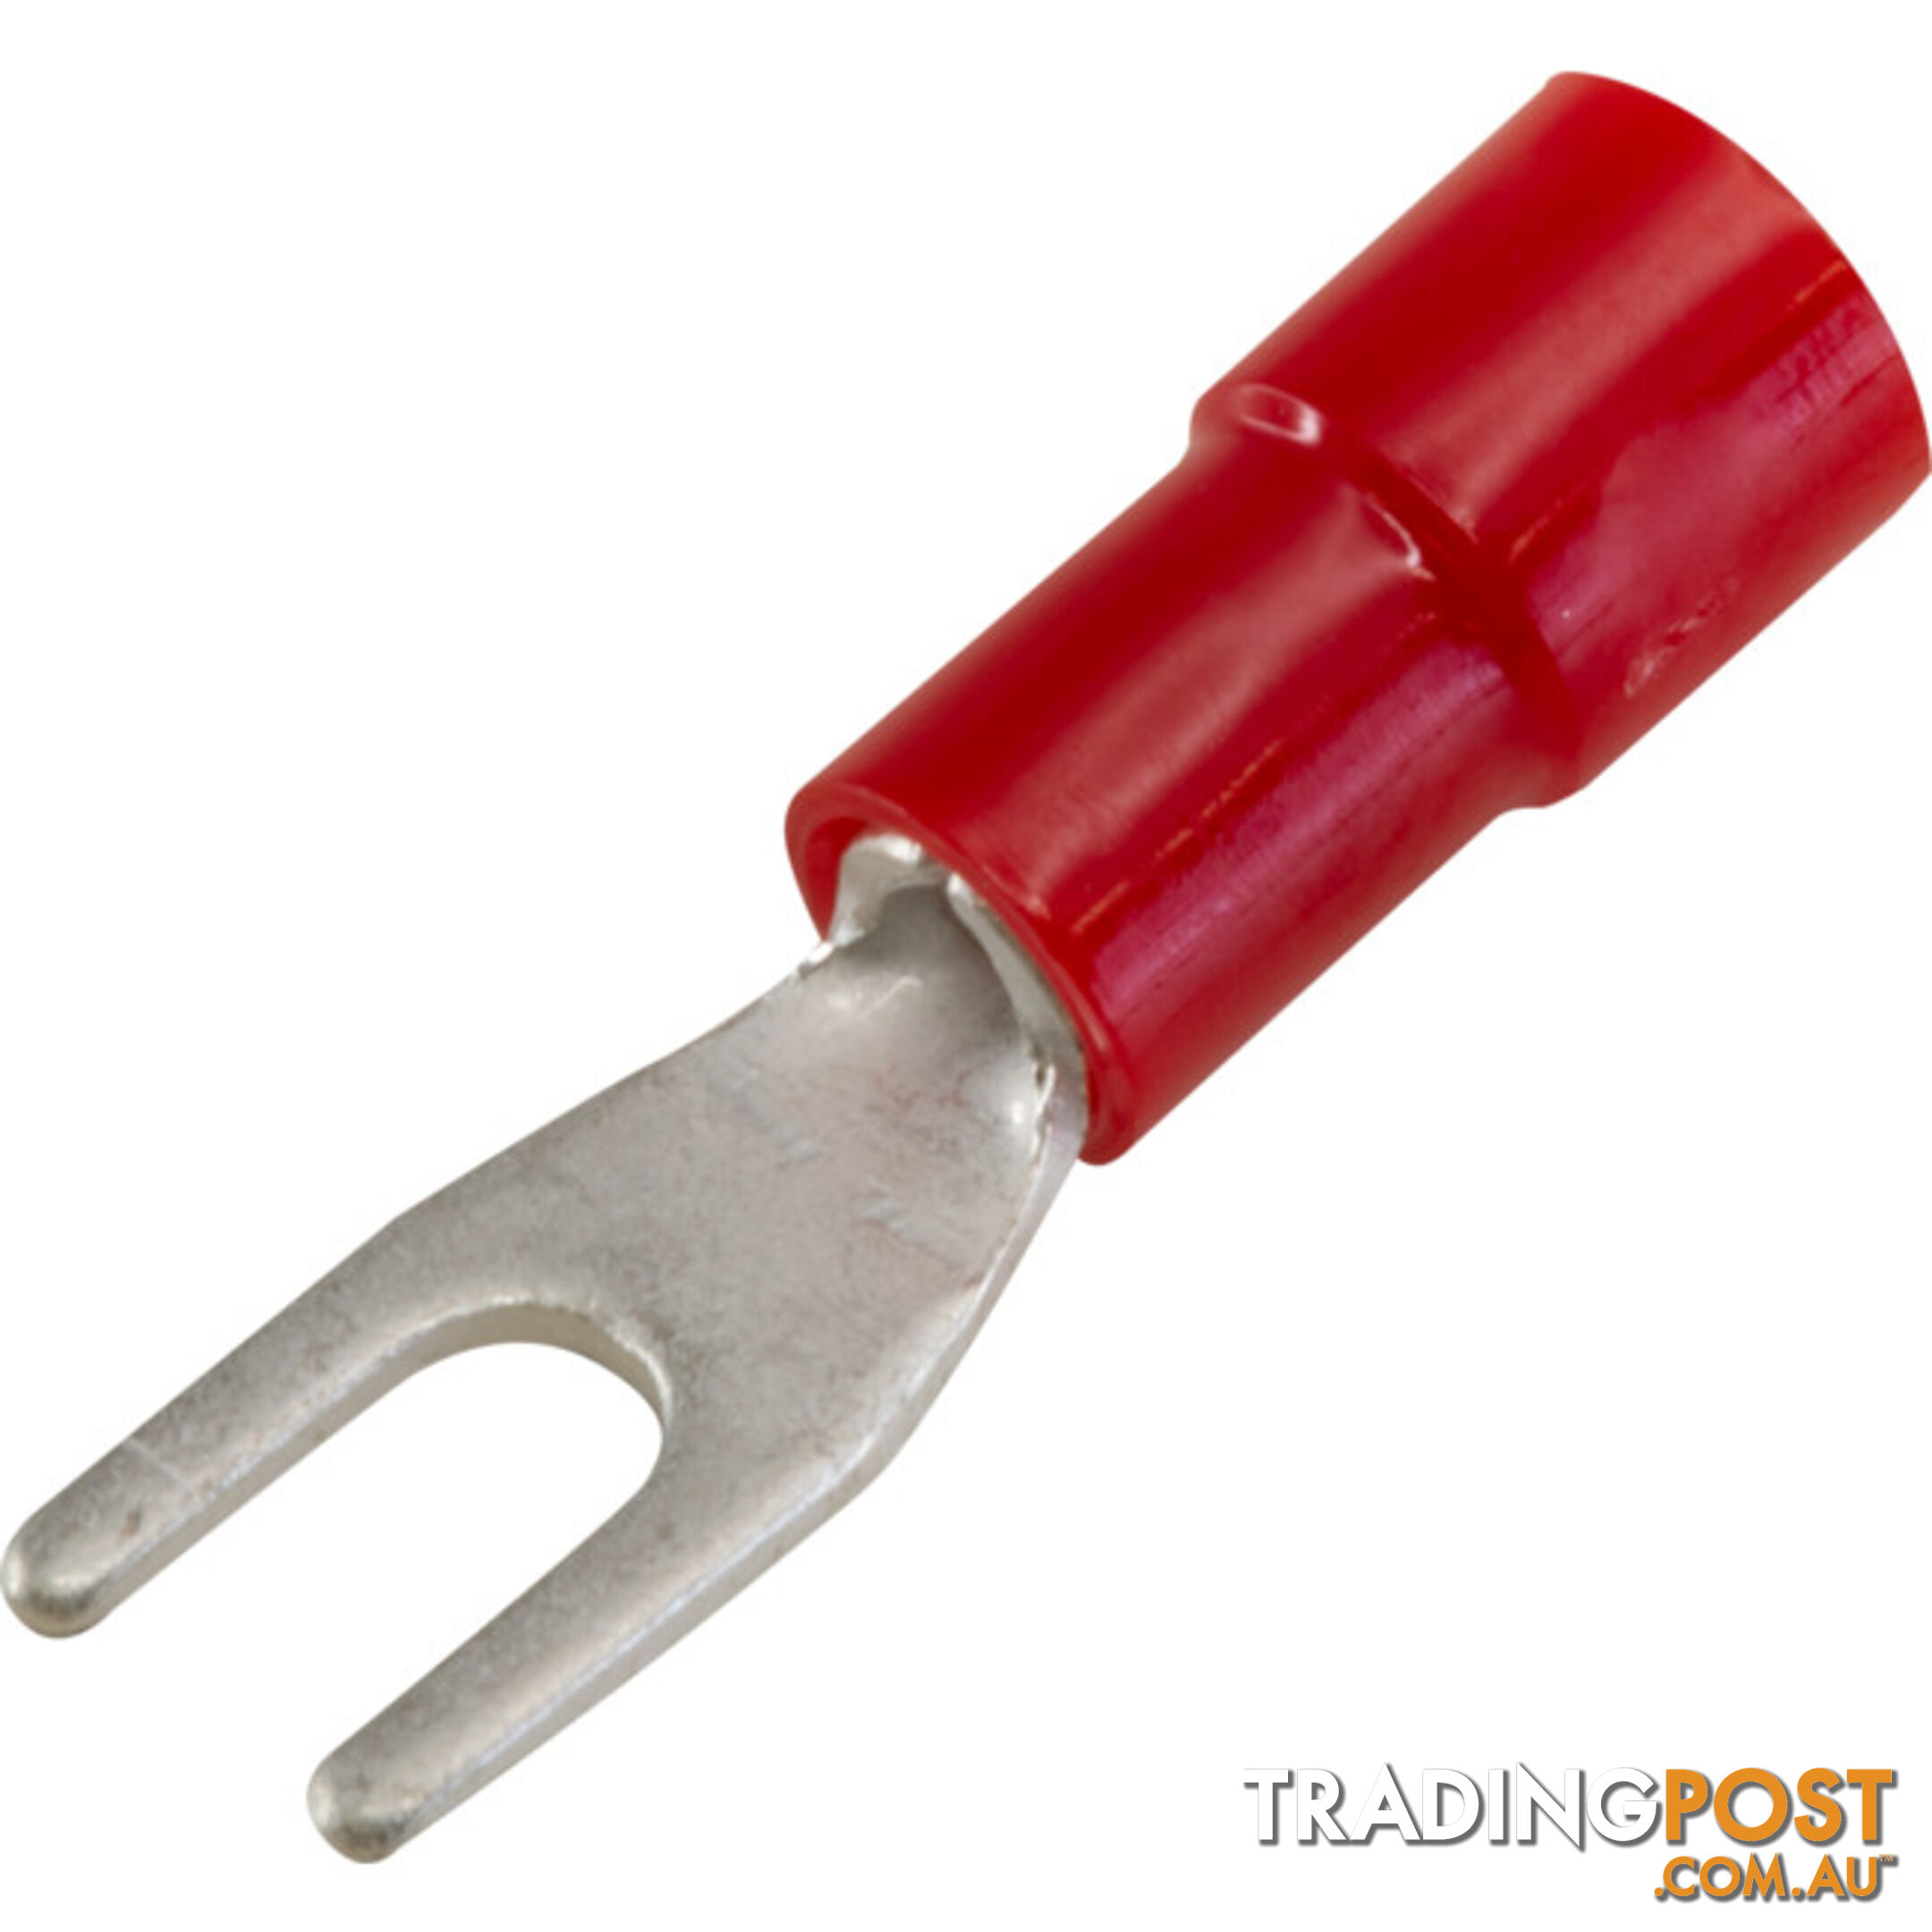 FS1.25-3-100 FORKED SPADE TERMINAL - RED 100PK WIRE RANGE 0.5-1MM SQUAR